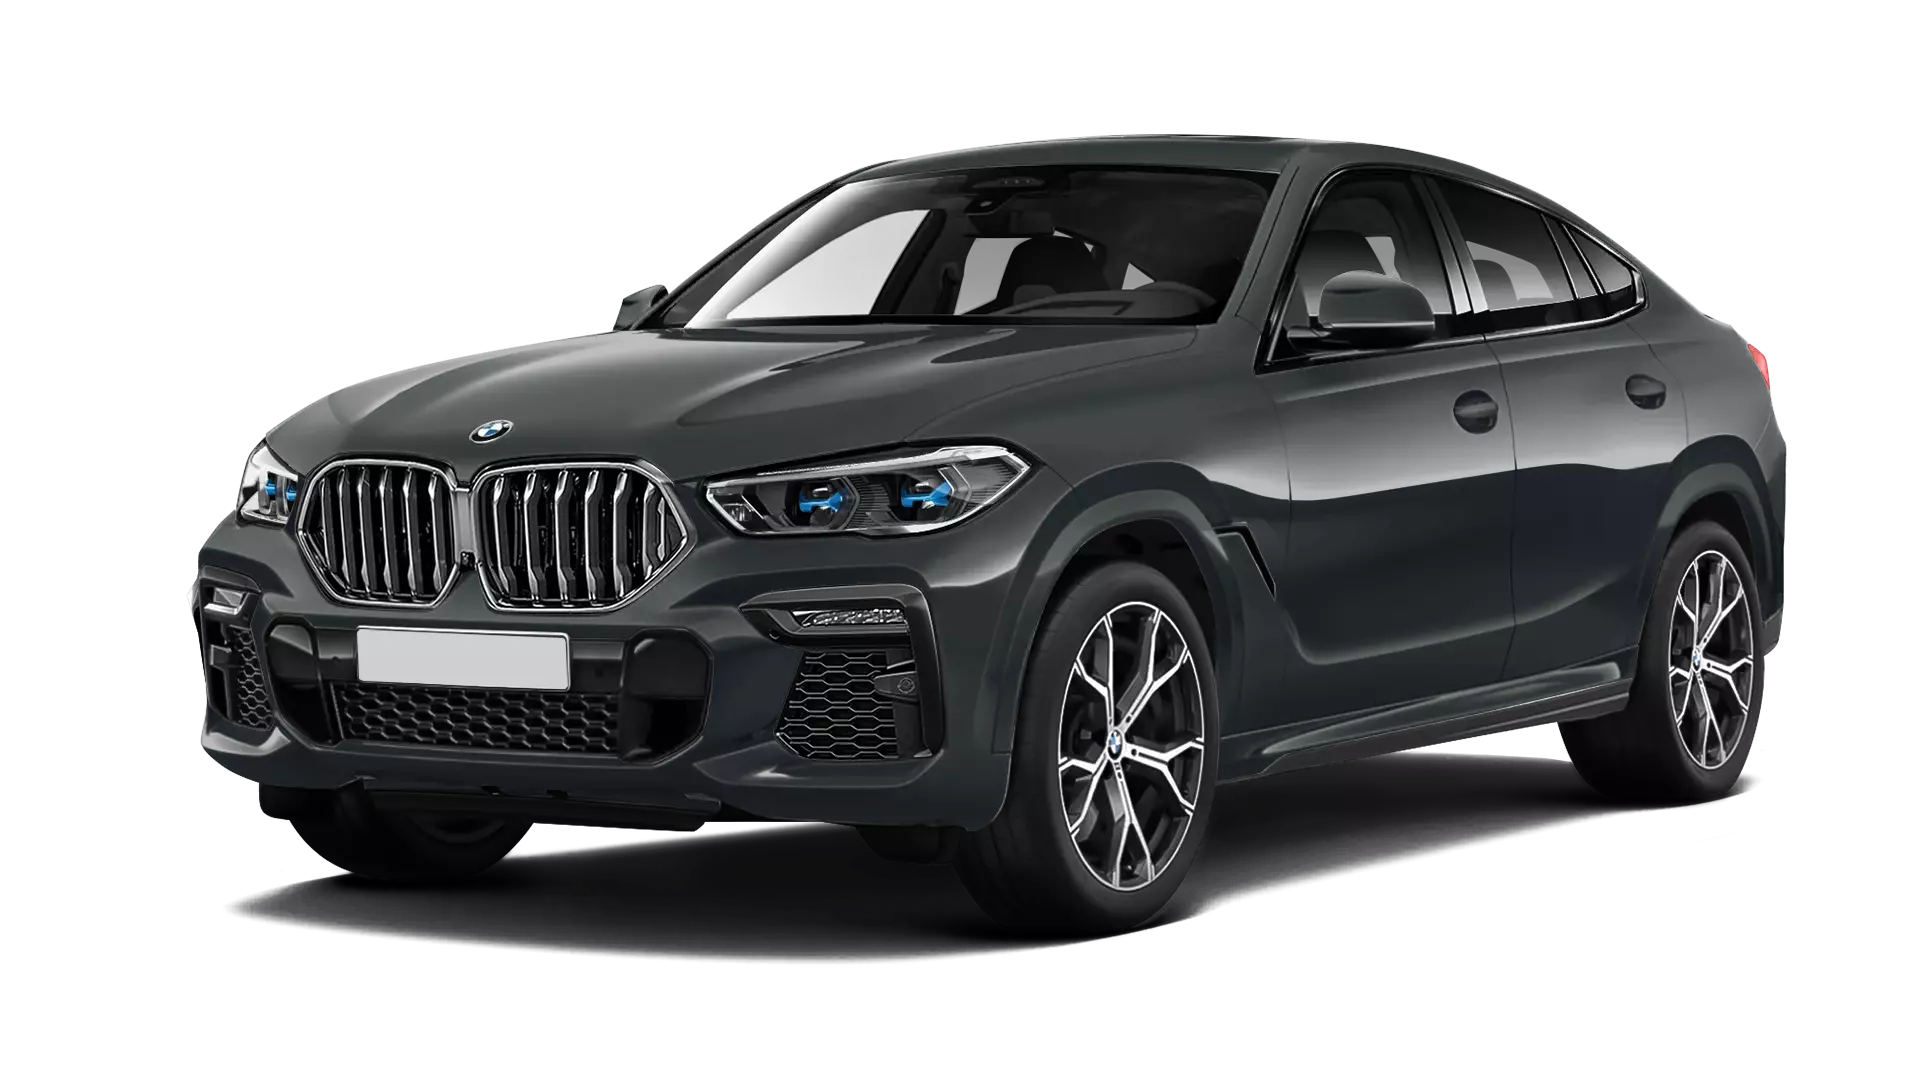 BMW X6 G06 stock front view in Dravit Grey color